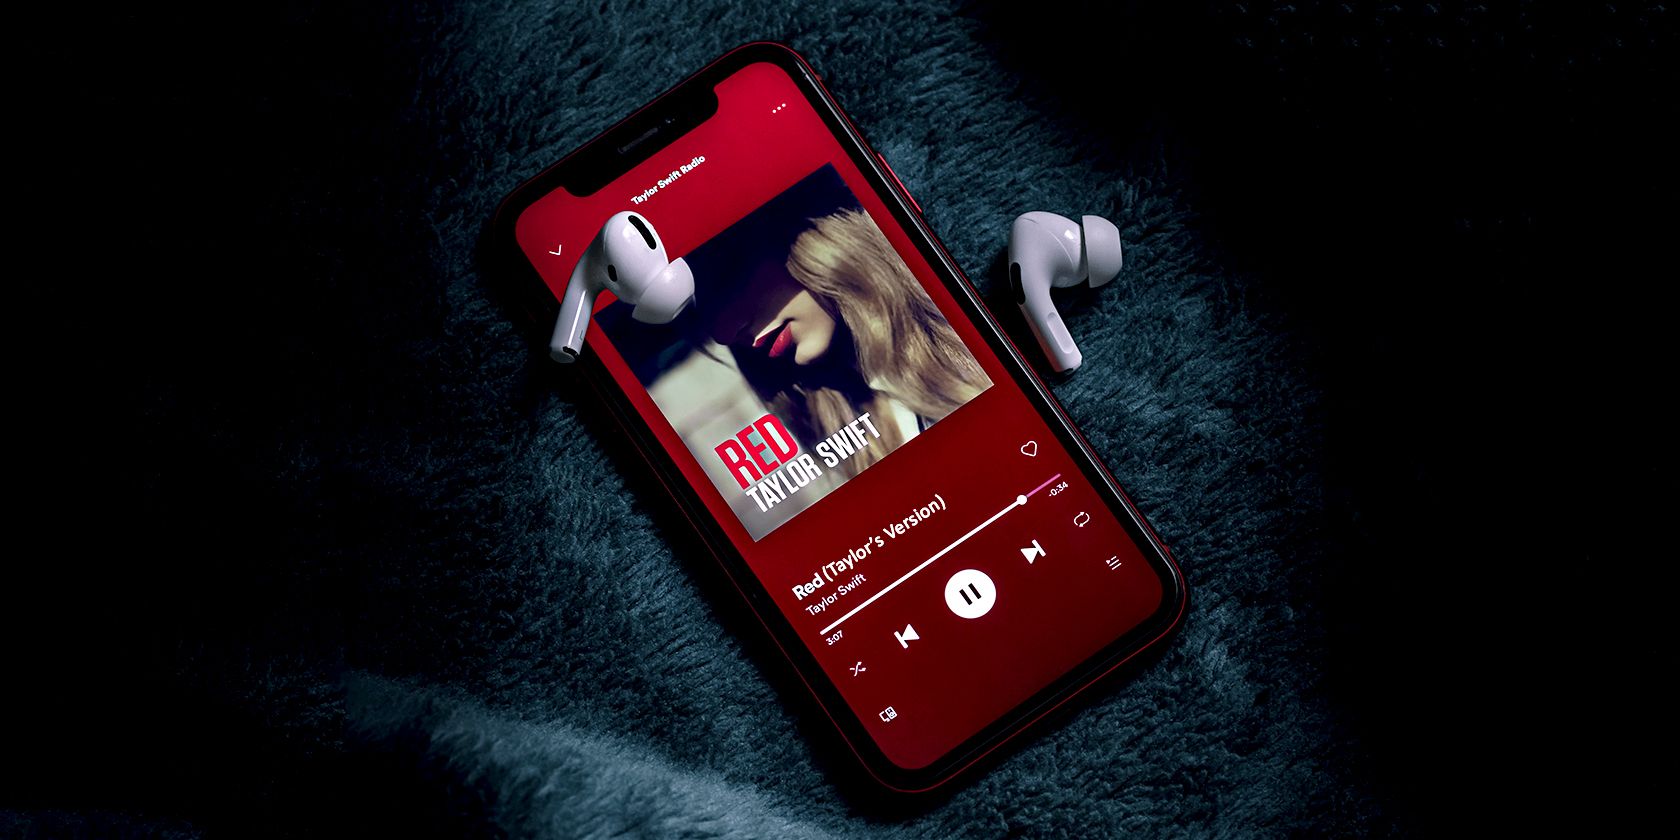 Red by Taylor Swift playing on Spotify on an iPhone